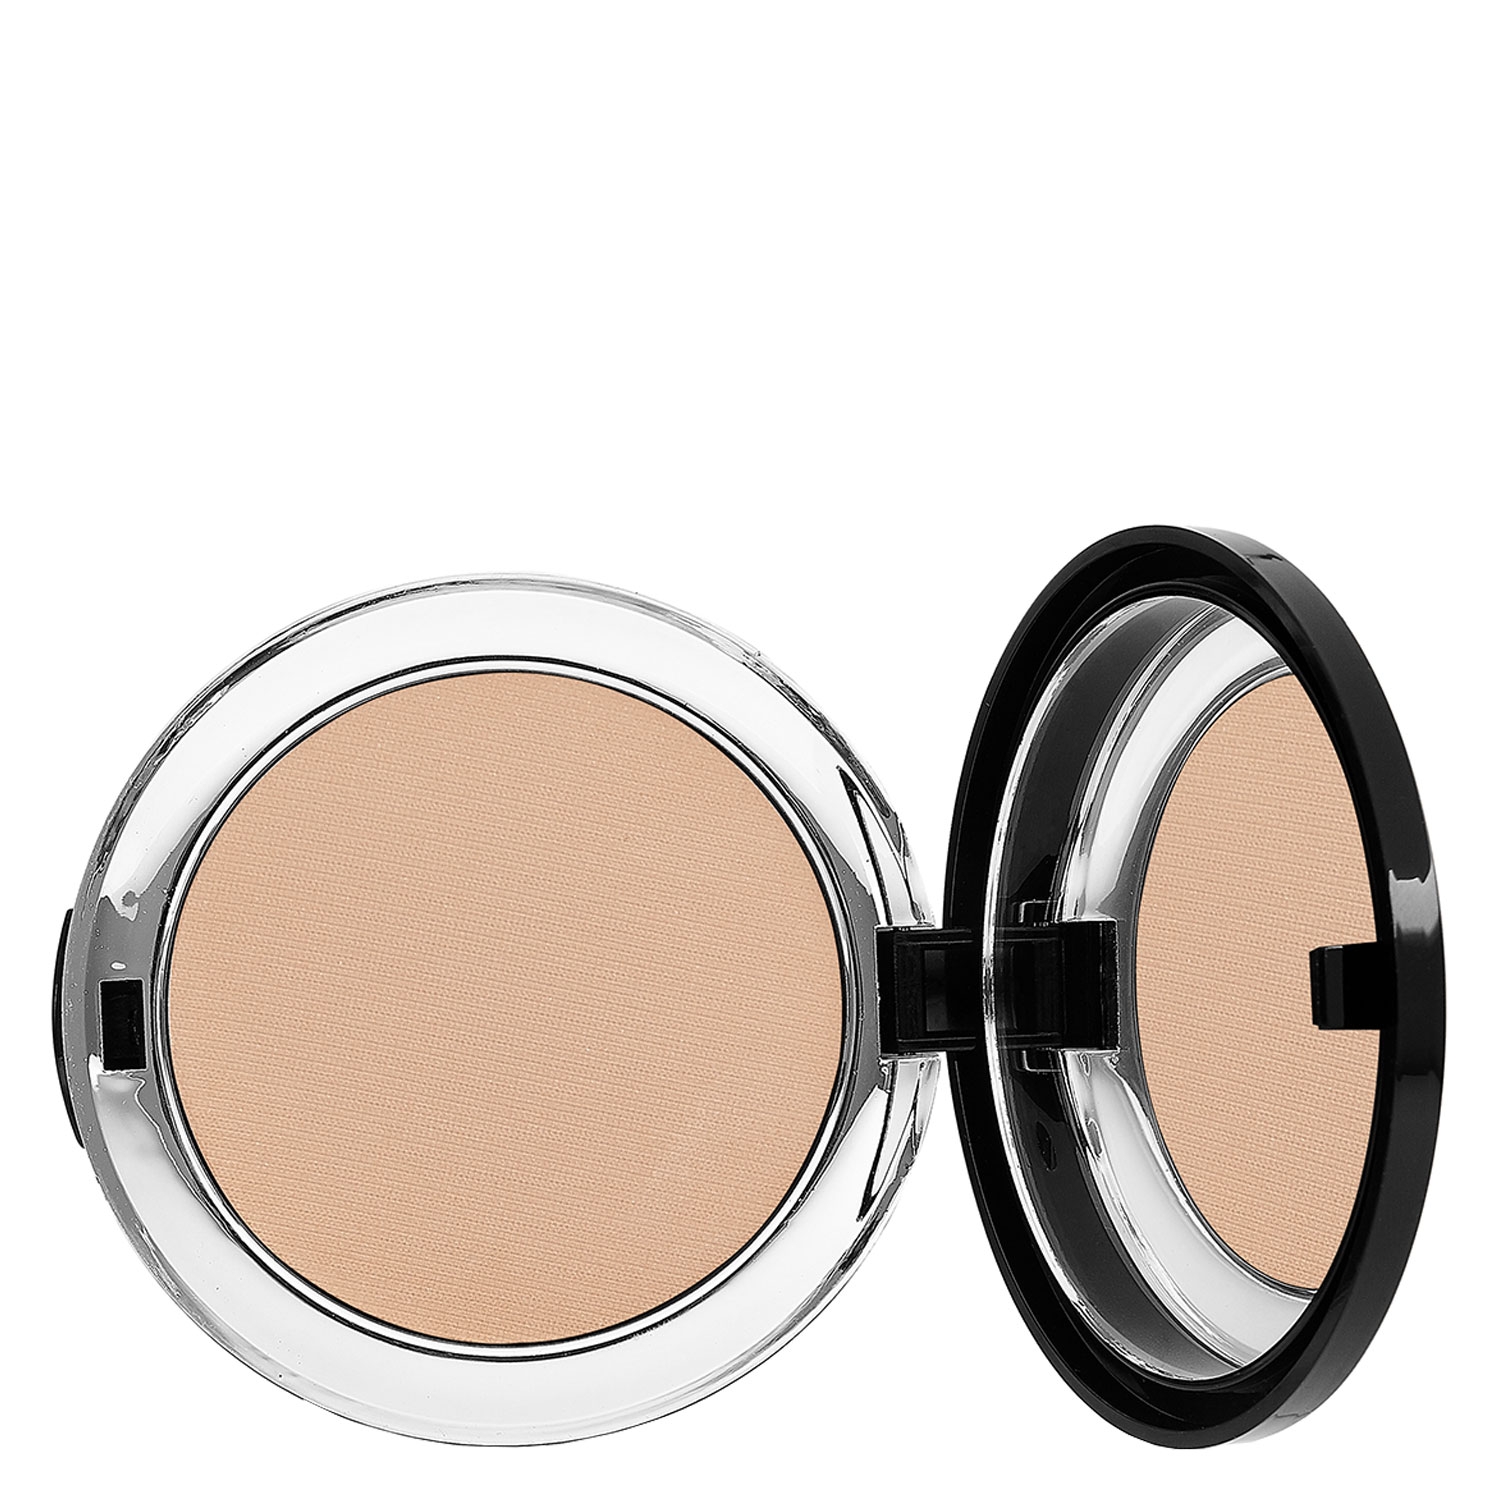 Product image from bellapierre Teint - Compact Mineral Foundation SPF15 Cinnamon